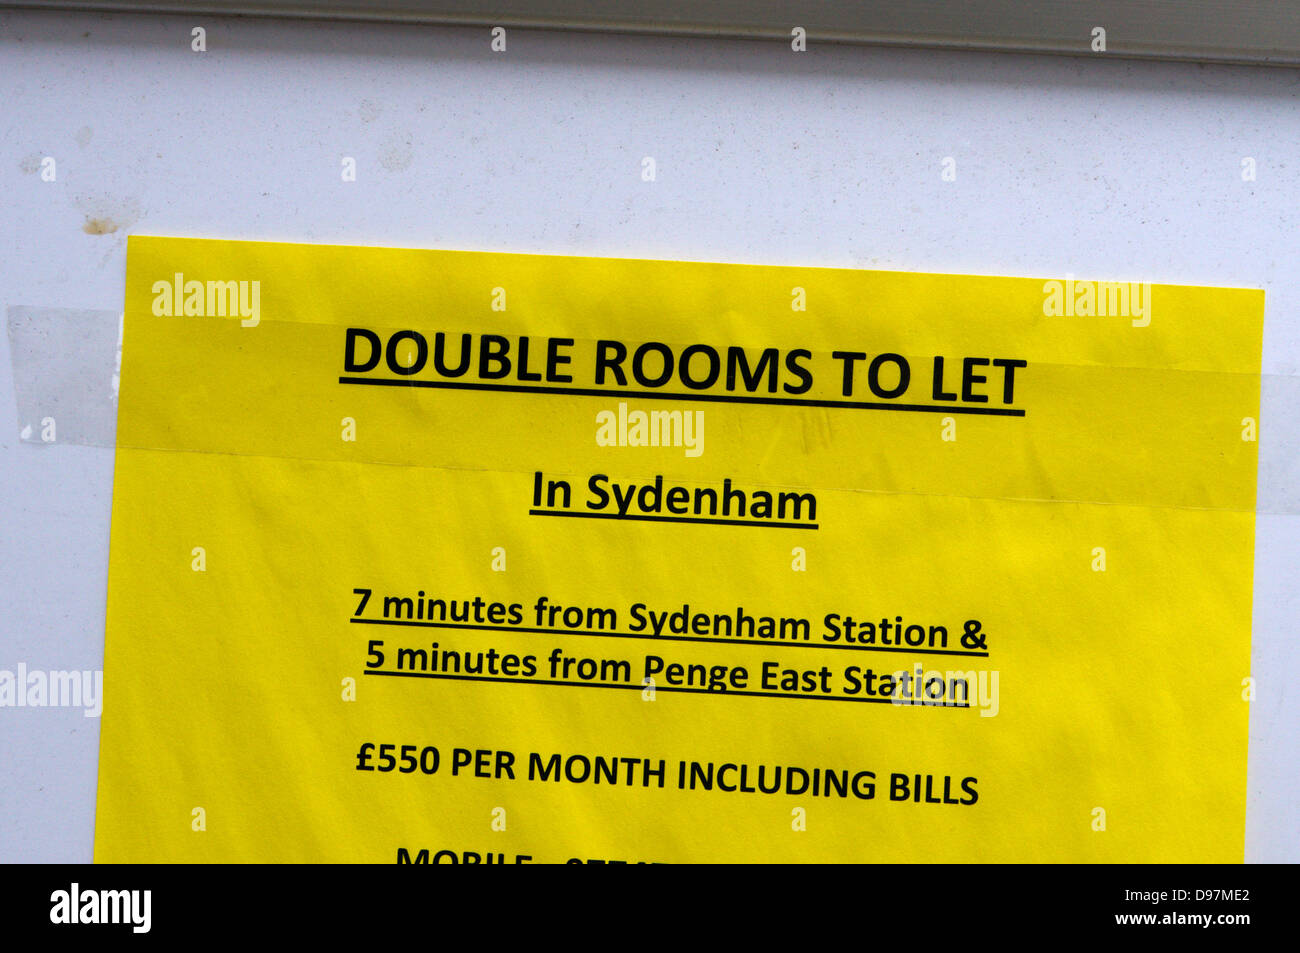 A sign for Double Rooms To Let in South London. Stock Photo